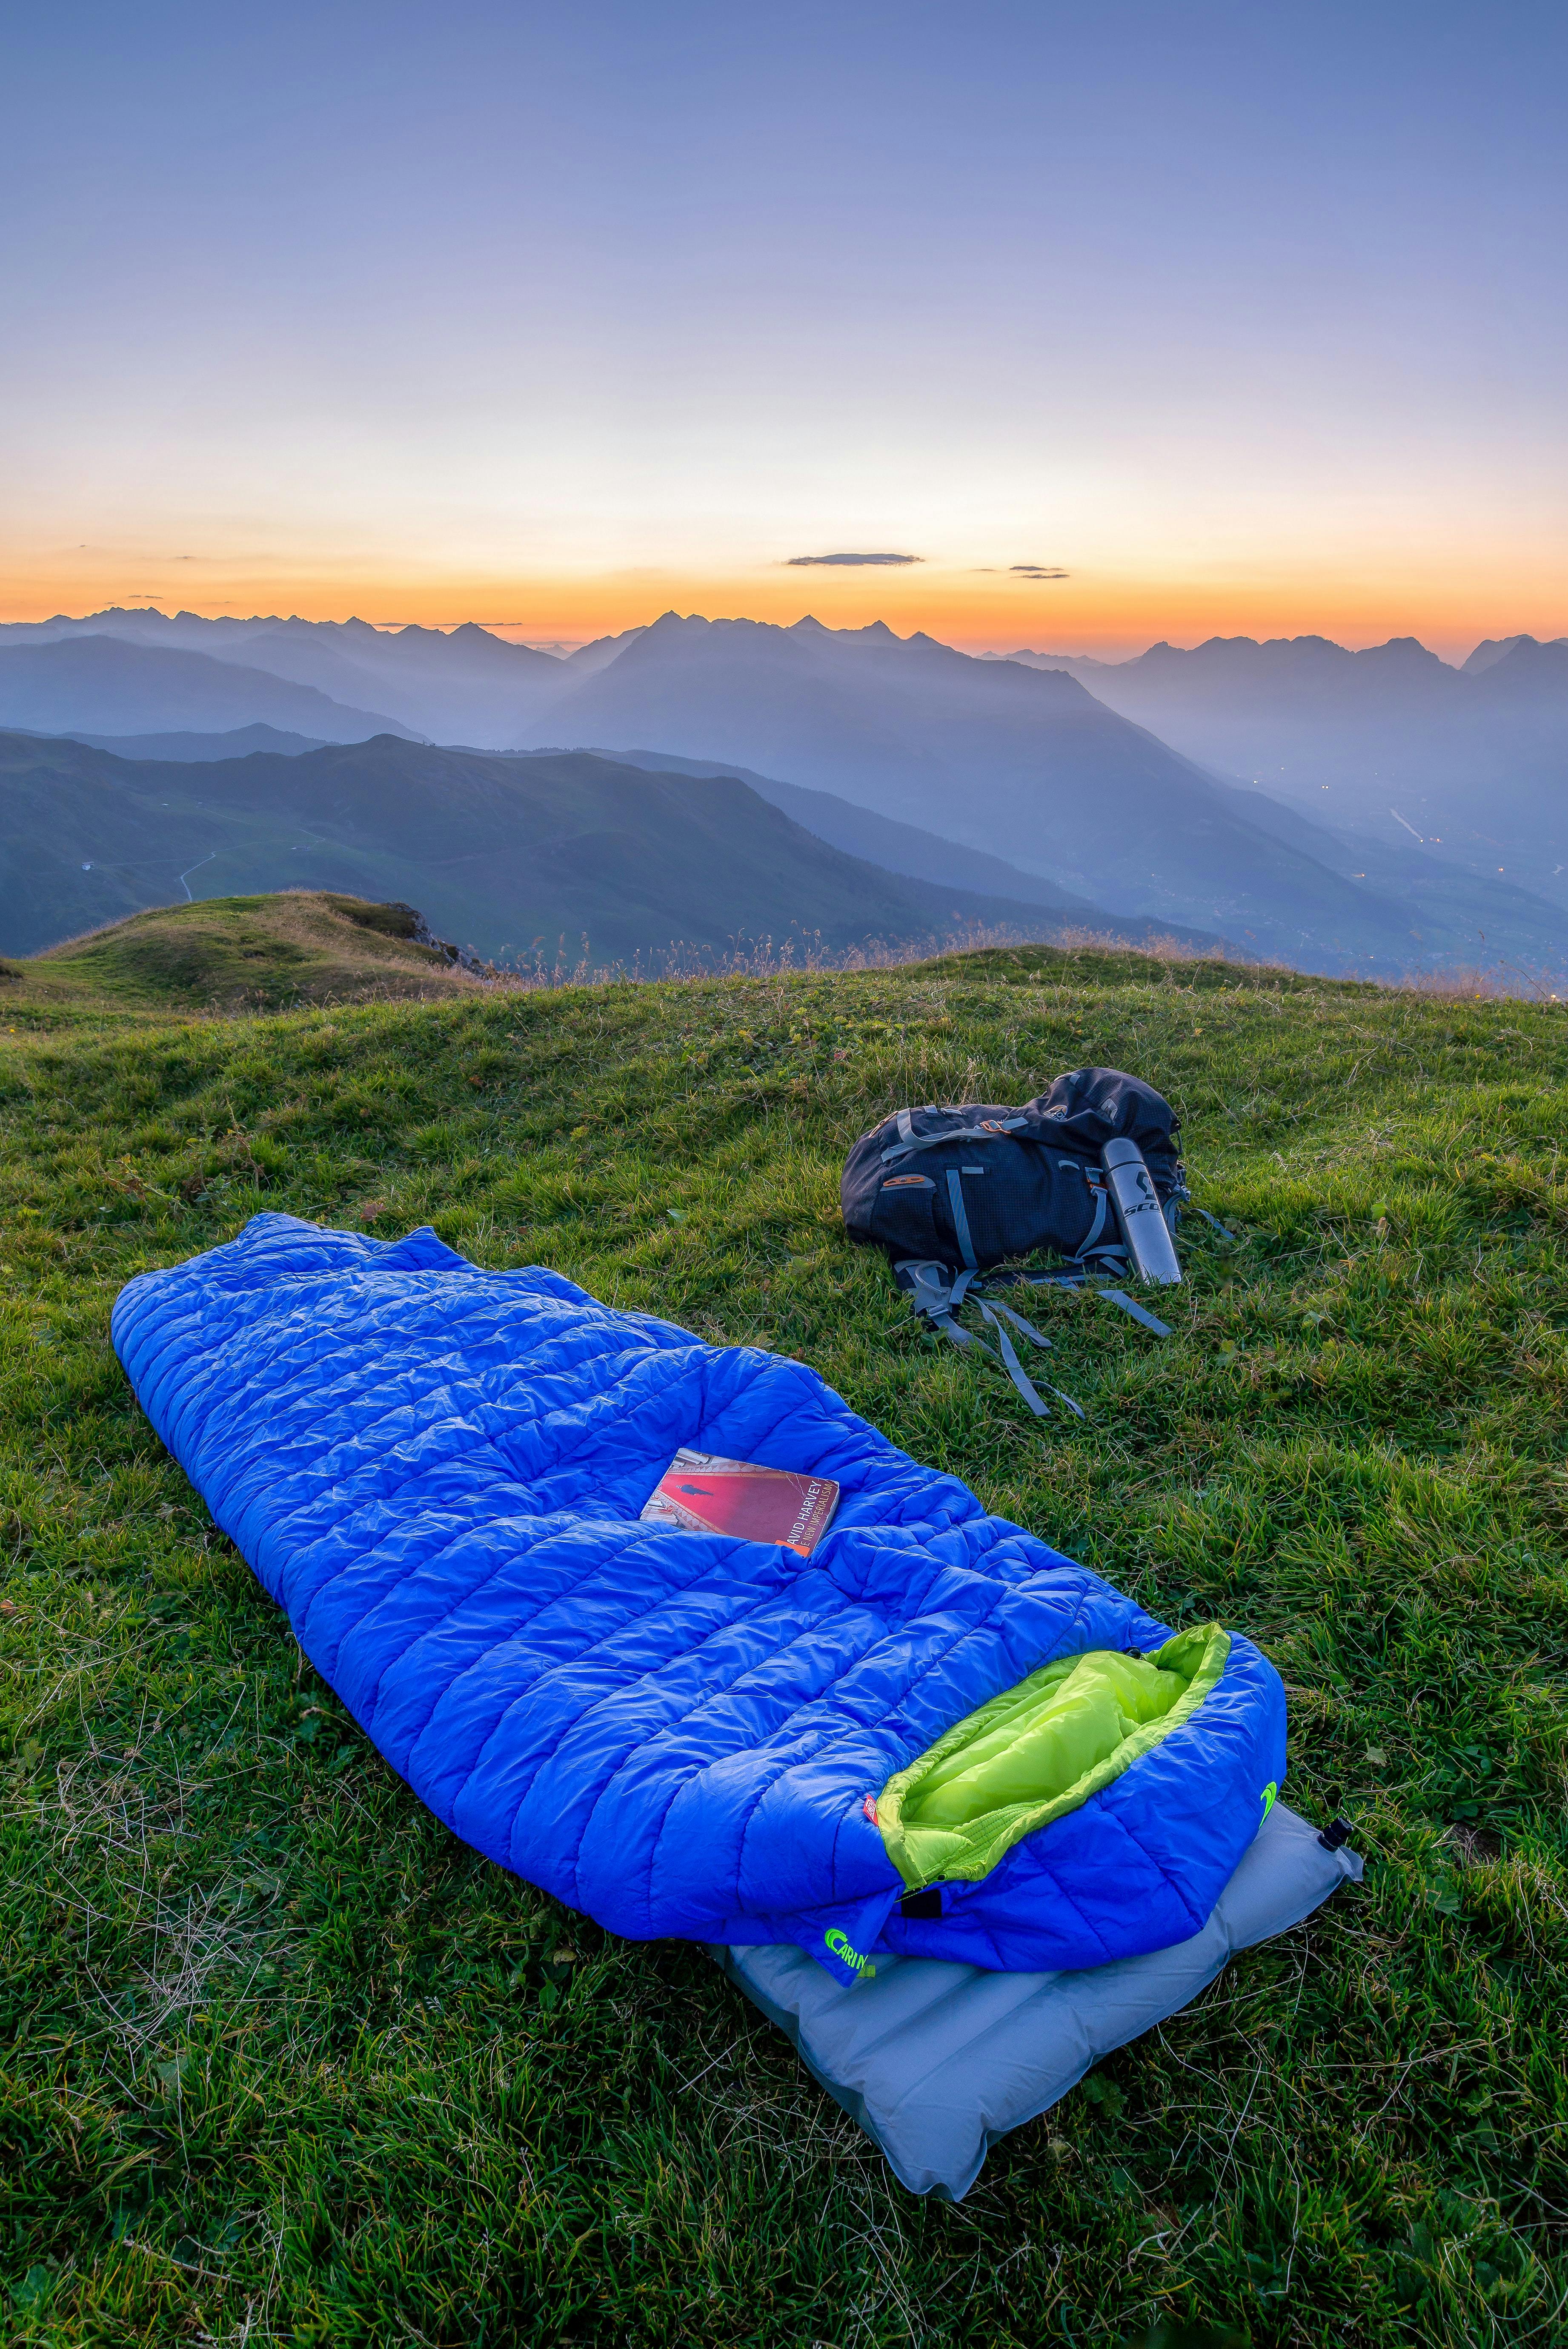 A blue sleeping bag and a backpack sit on a grassy hill